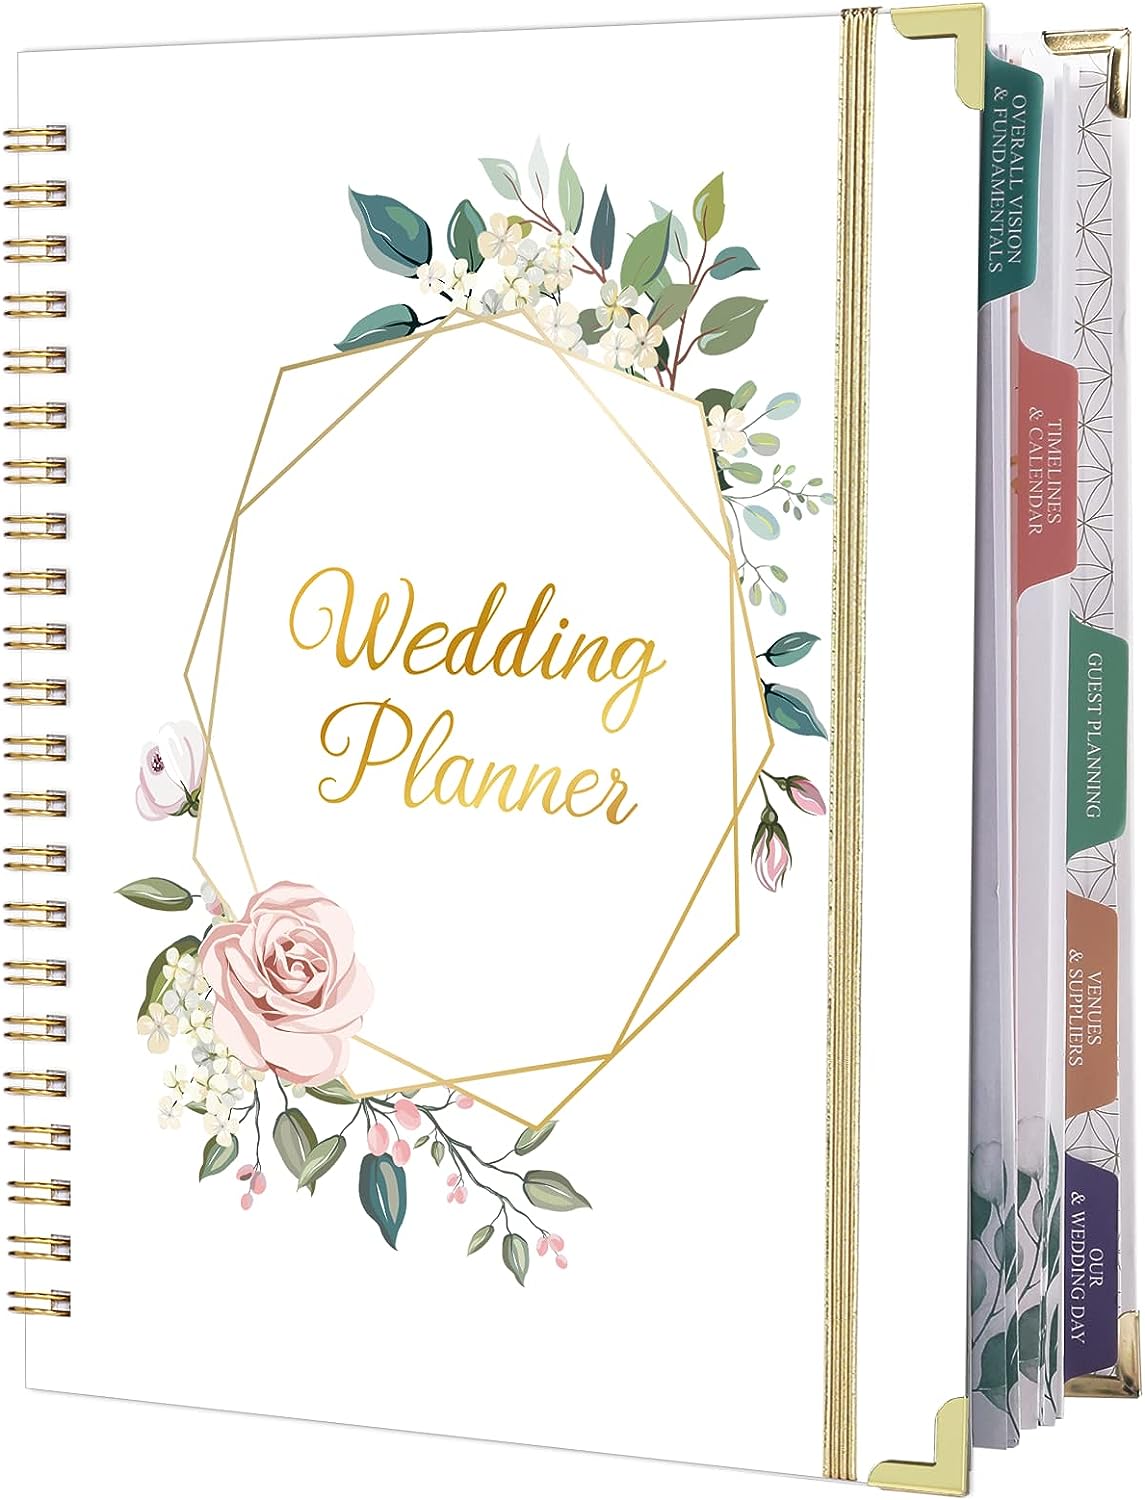  Organize your Big Day with Our Wedding Planner